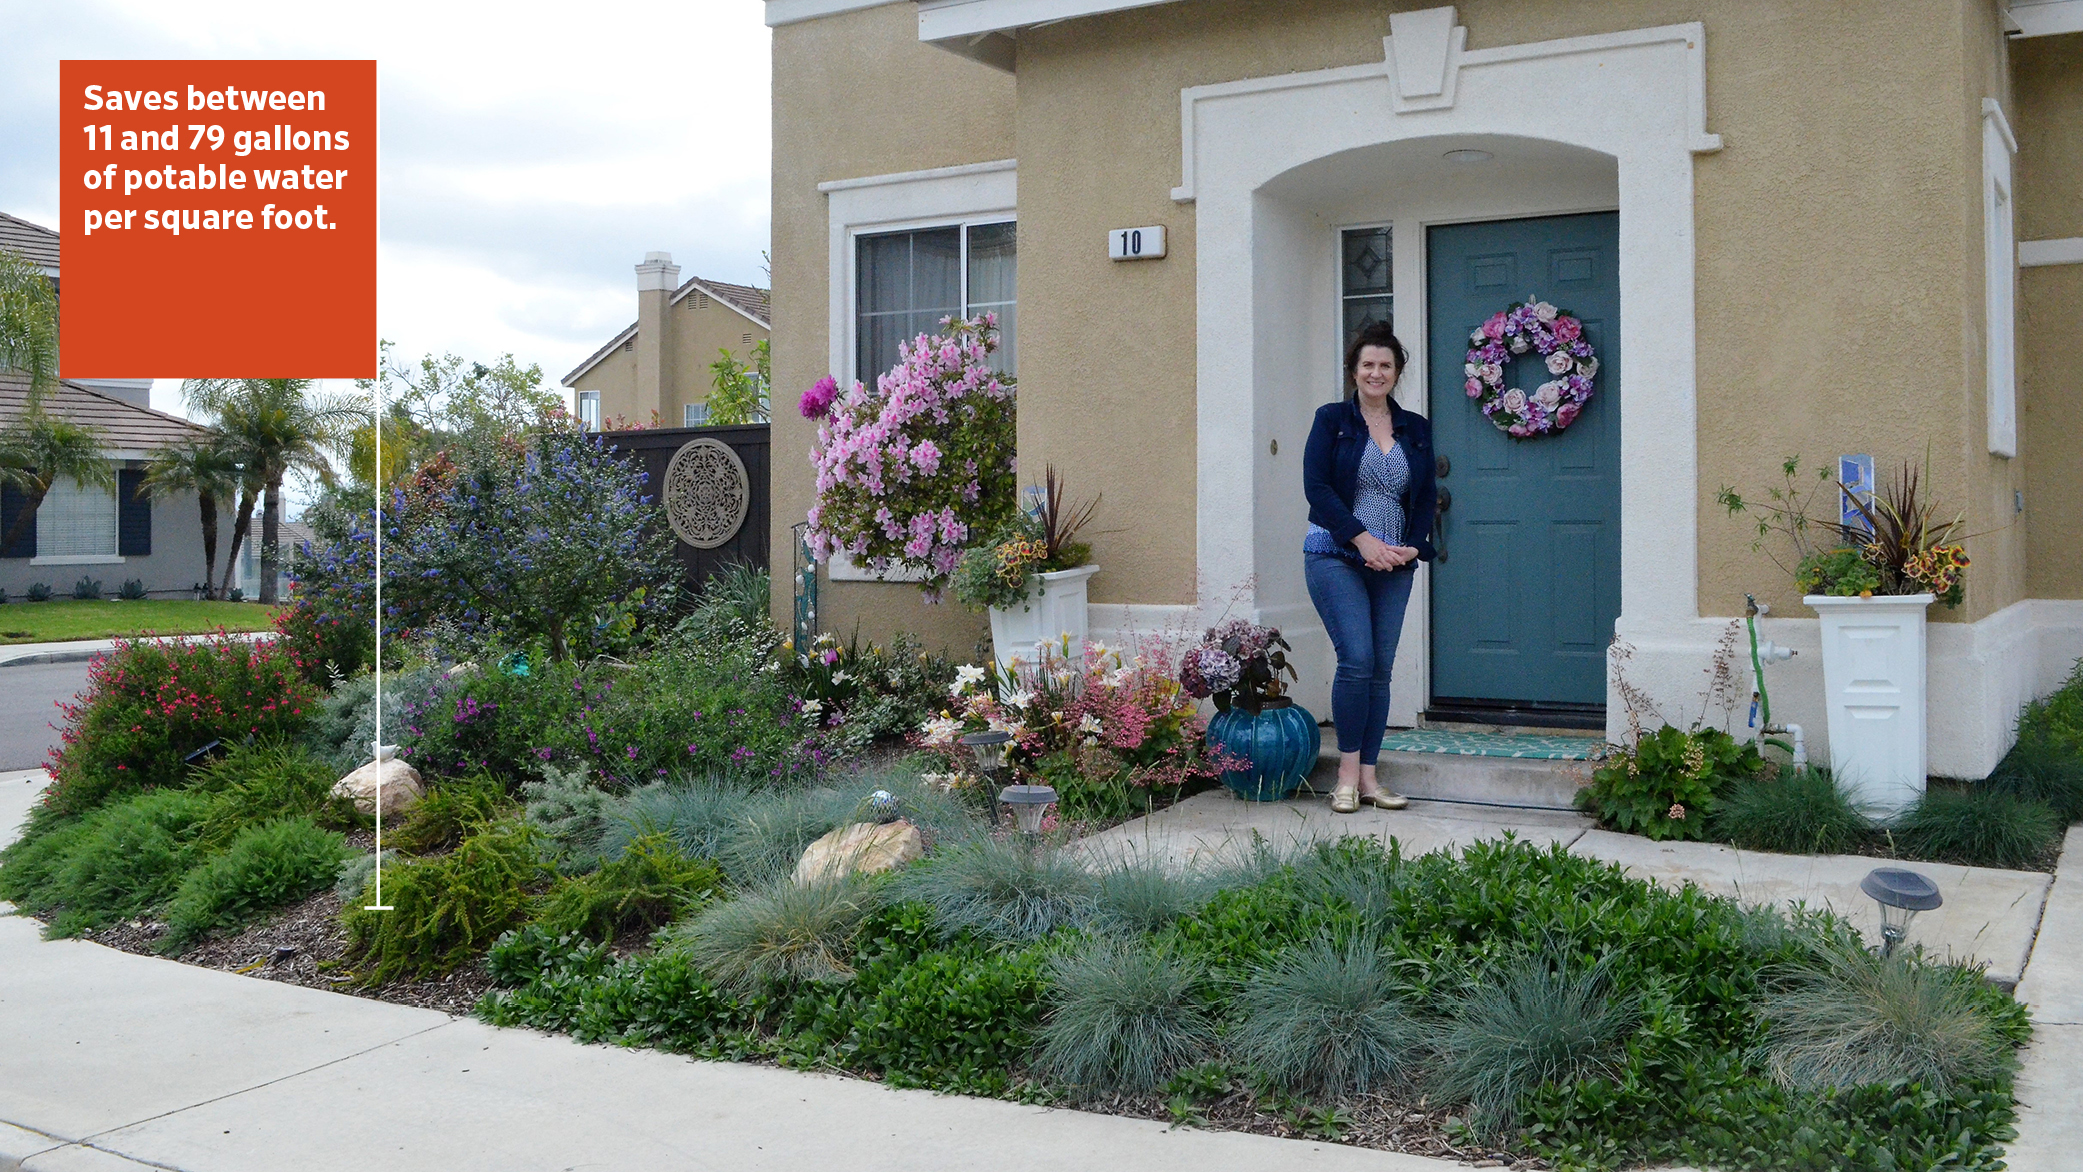 A homeowner stands in front of her NatureScape gardens in Orange County, California. There are diverse and appealing native plants.